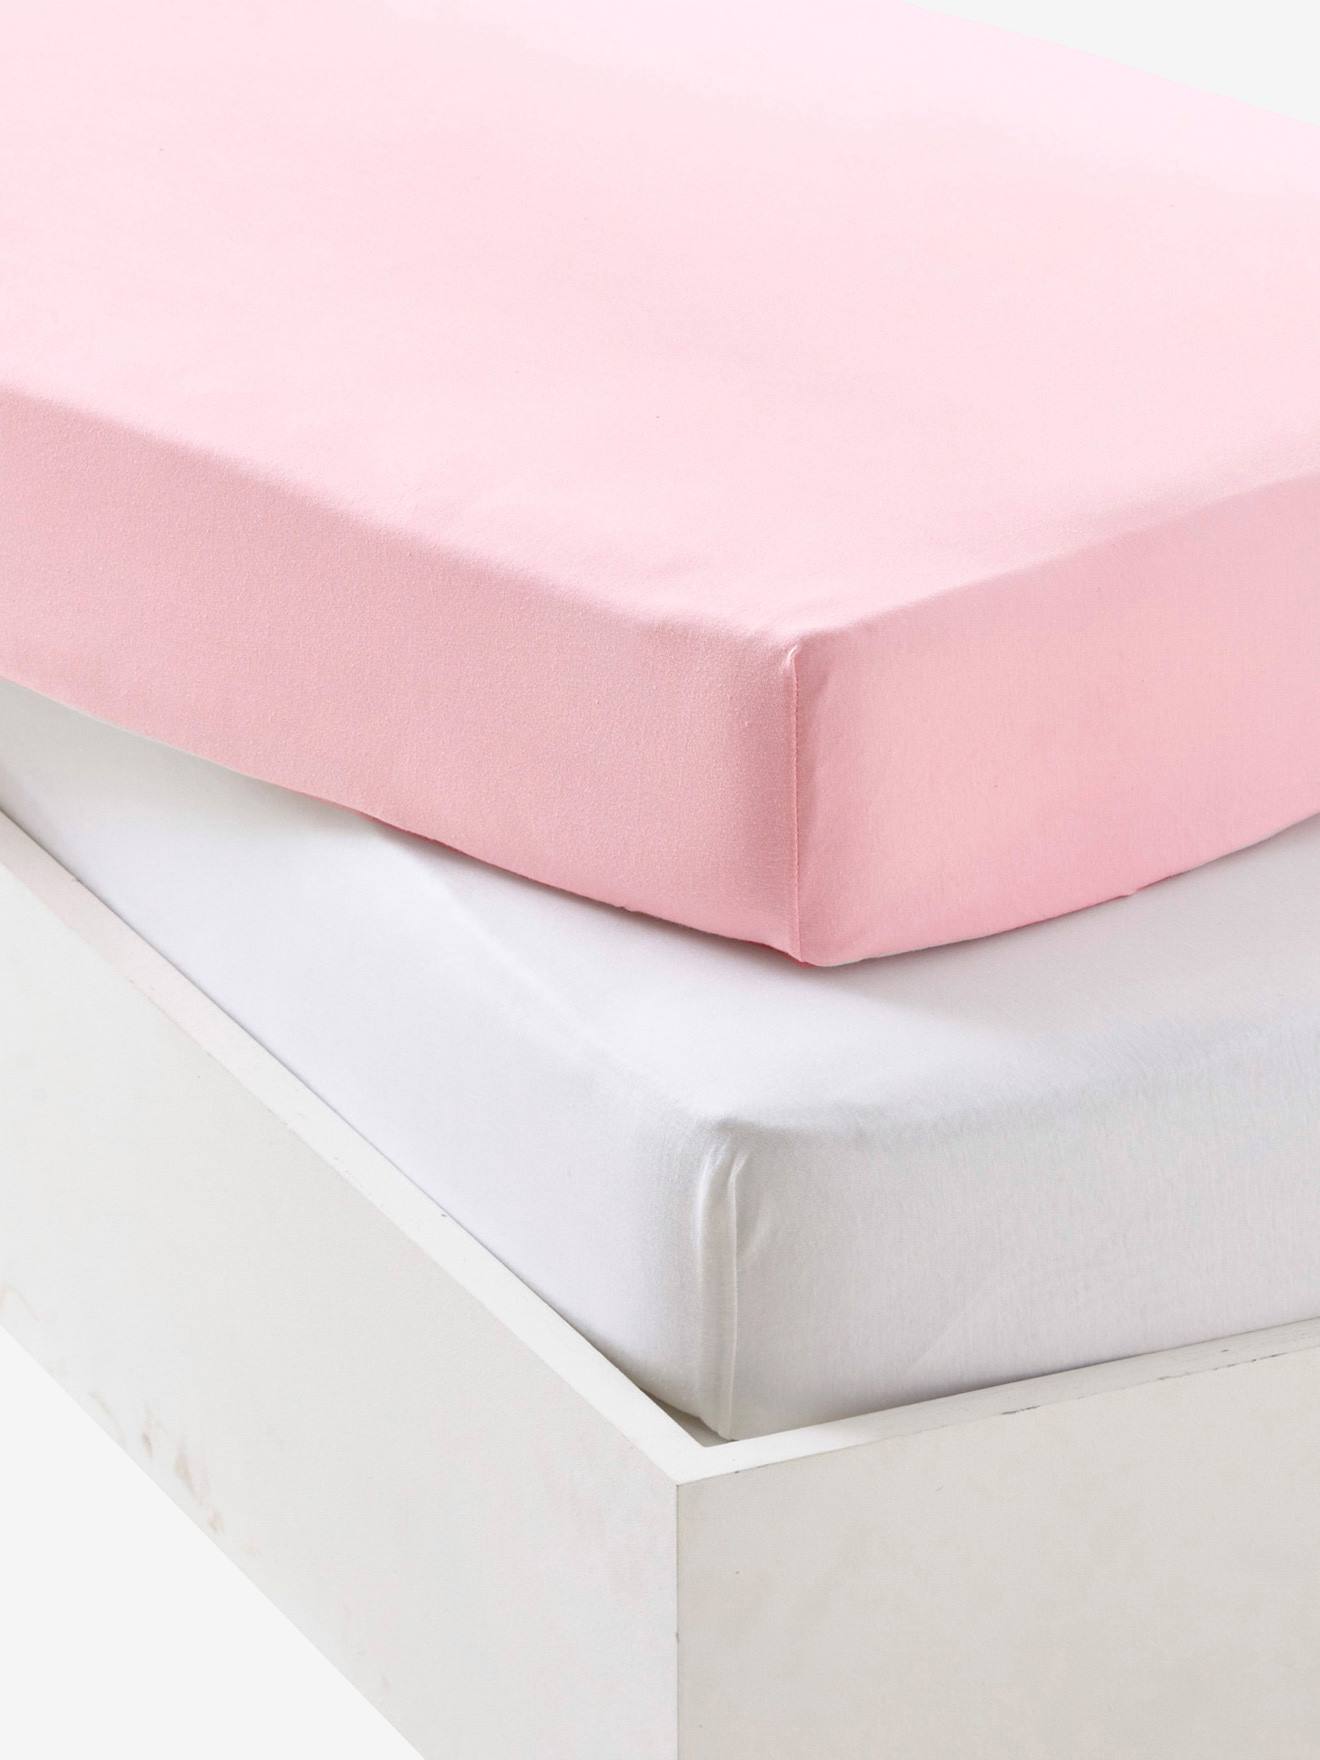 2-PACK 100% Cotton jersey sheets Pocket 20cm With elastic - 2x cot bed fitted sheets Double Jersey 70 x 140 cm Pink soft & cozy for toddler & baby bed Certified Free from Chemical